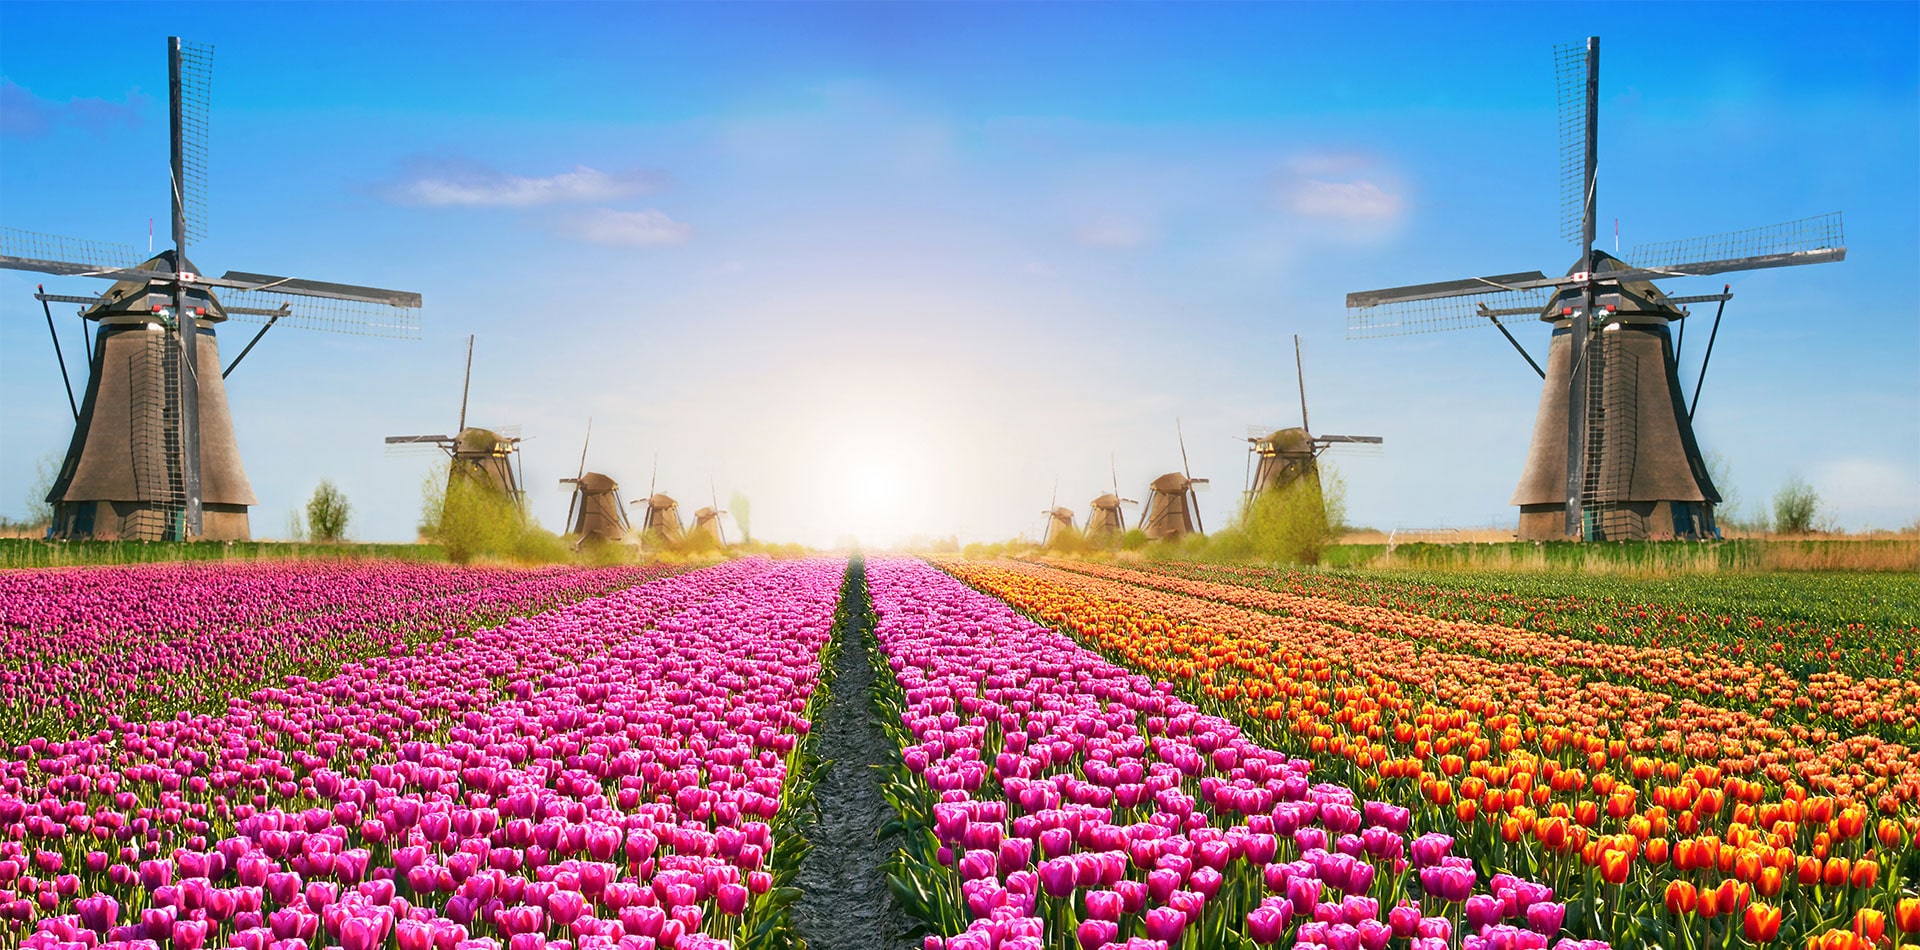 Windmills and Tulips in Amsterdam, Netherlands